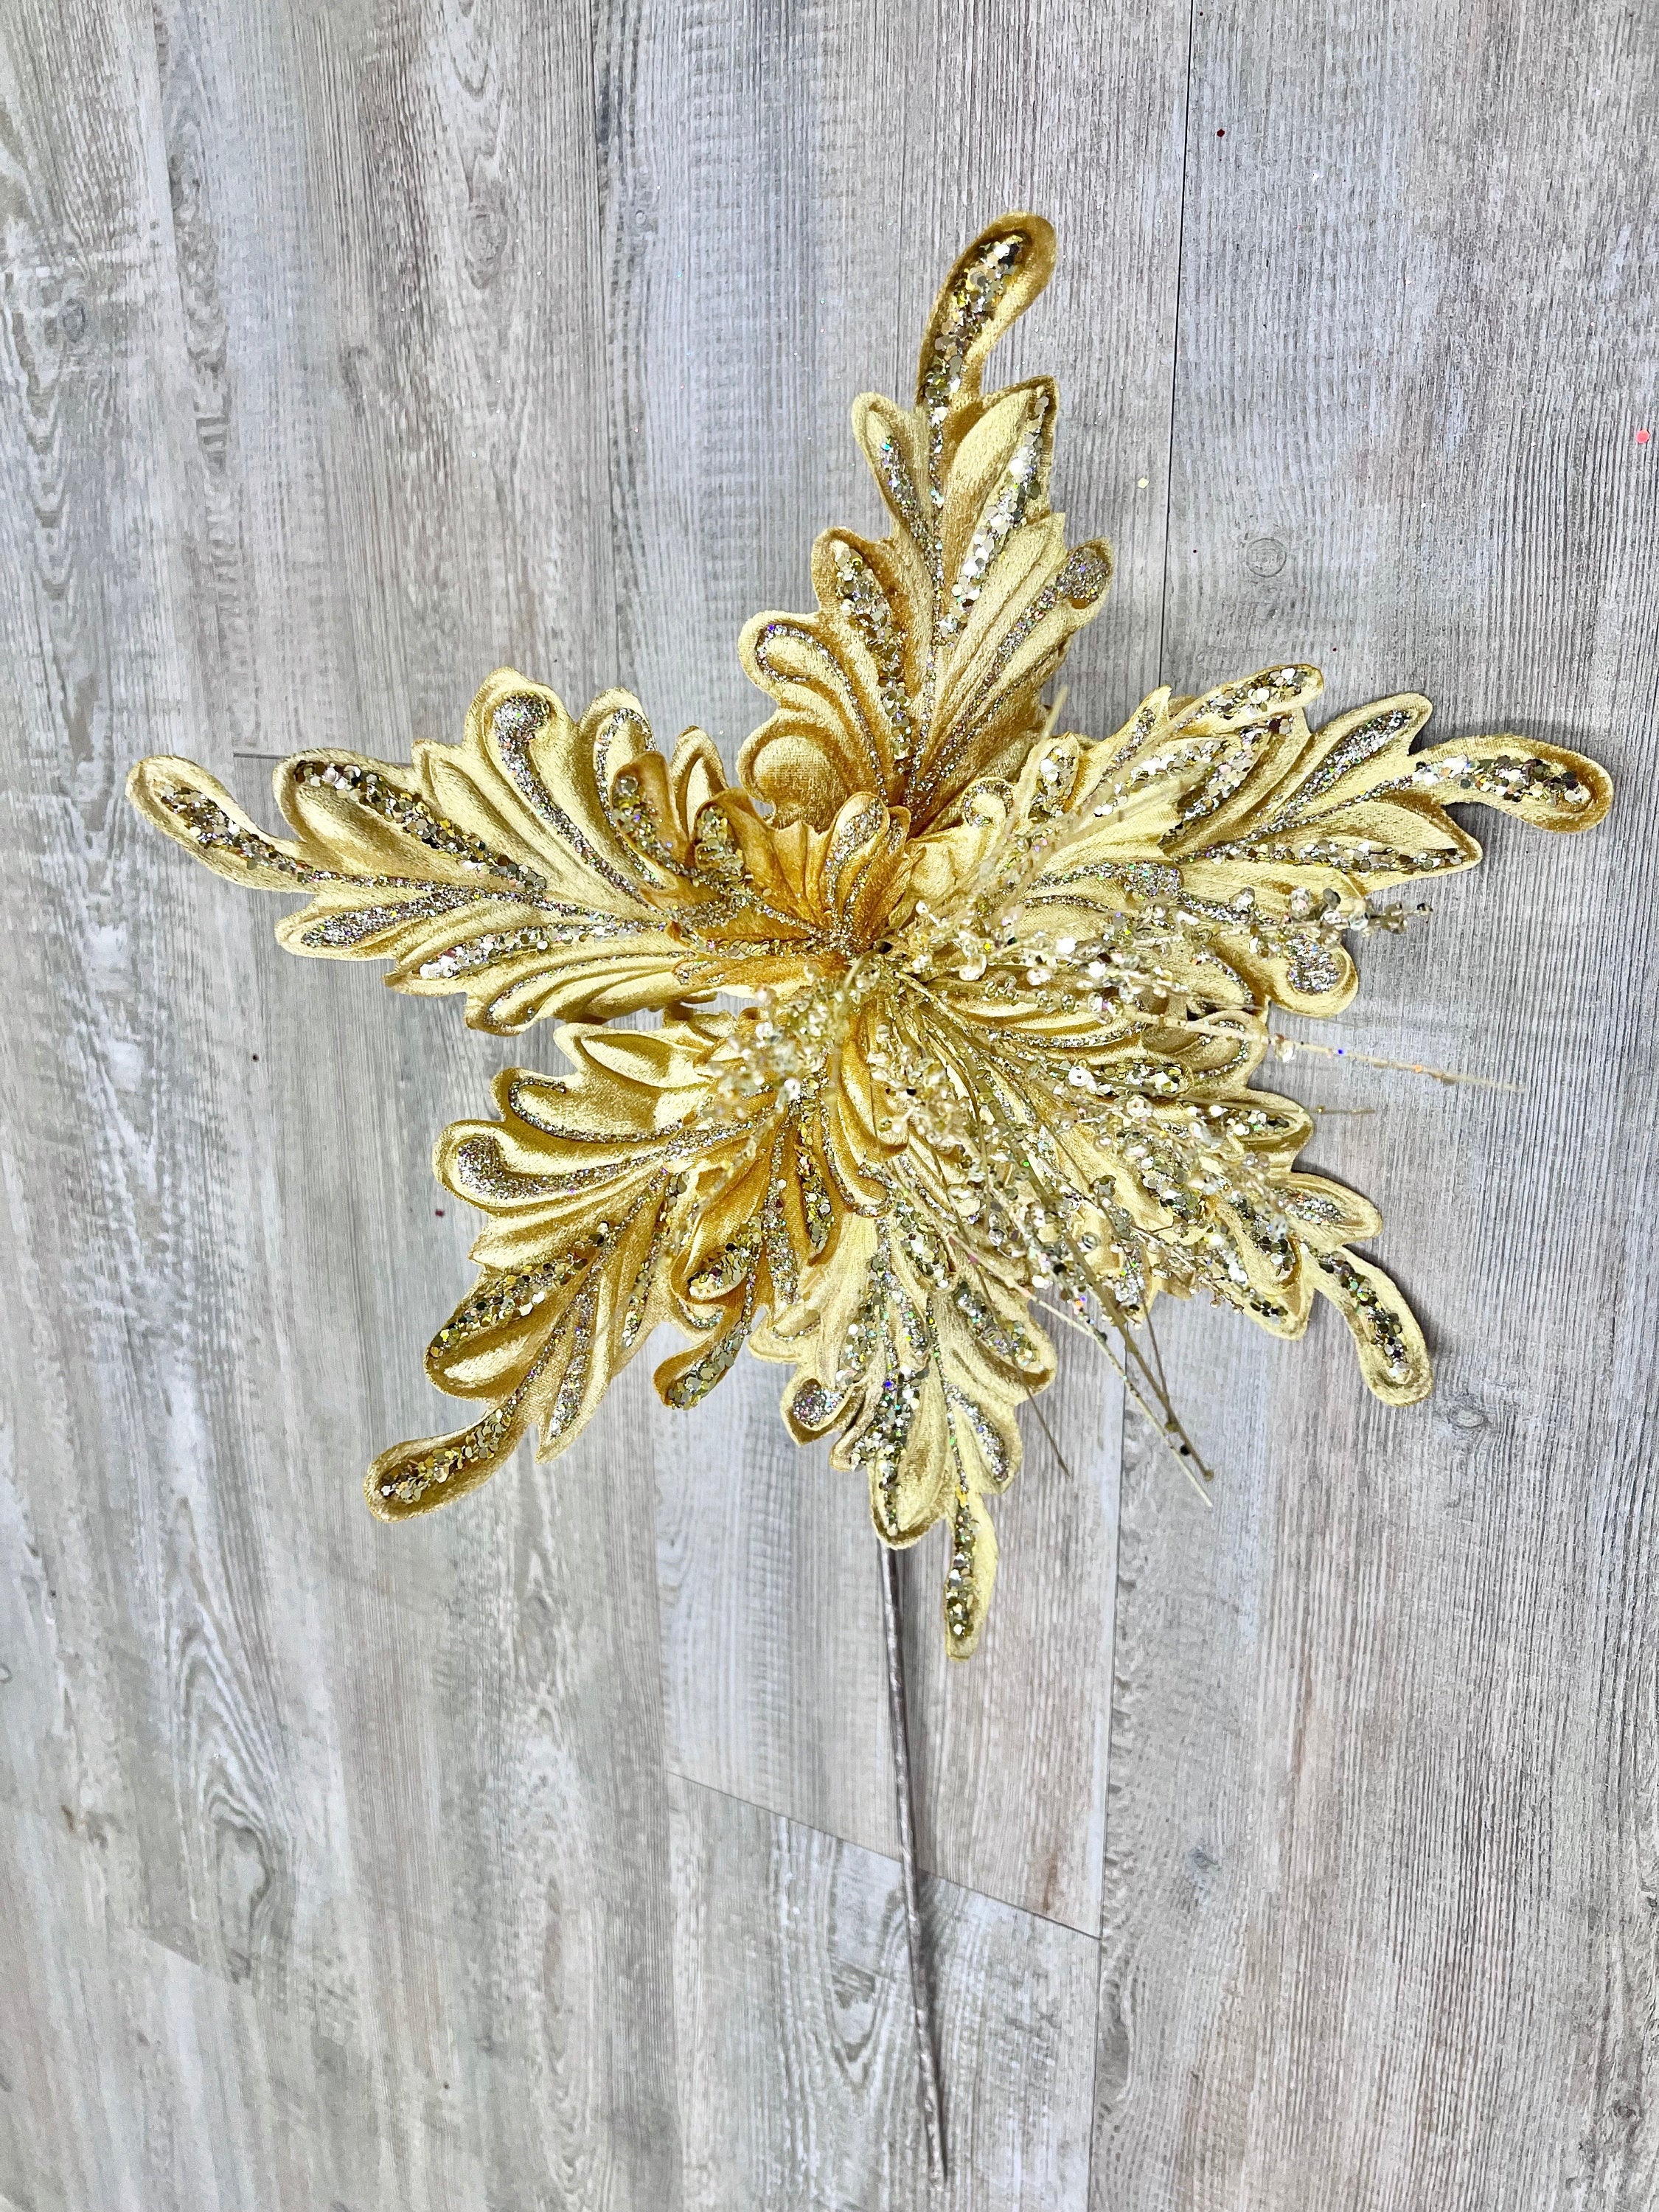 Gold Fancy Floral Stem, Gold Poinsettia Stem for Christmas Tree, Gold Christmas Tree Decorations, Gold Jeweled Poinsettia for Wreaths